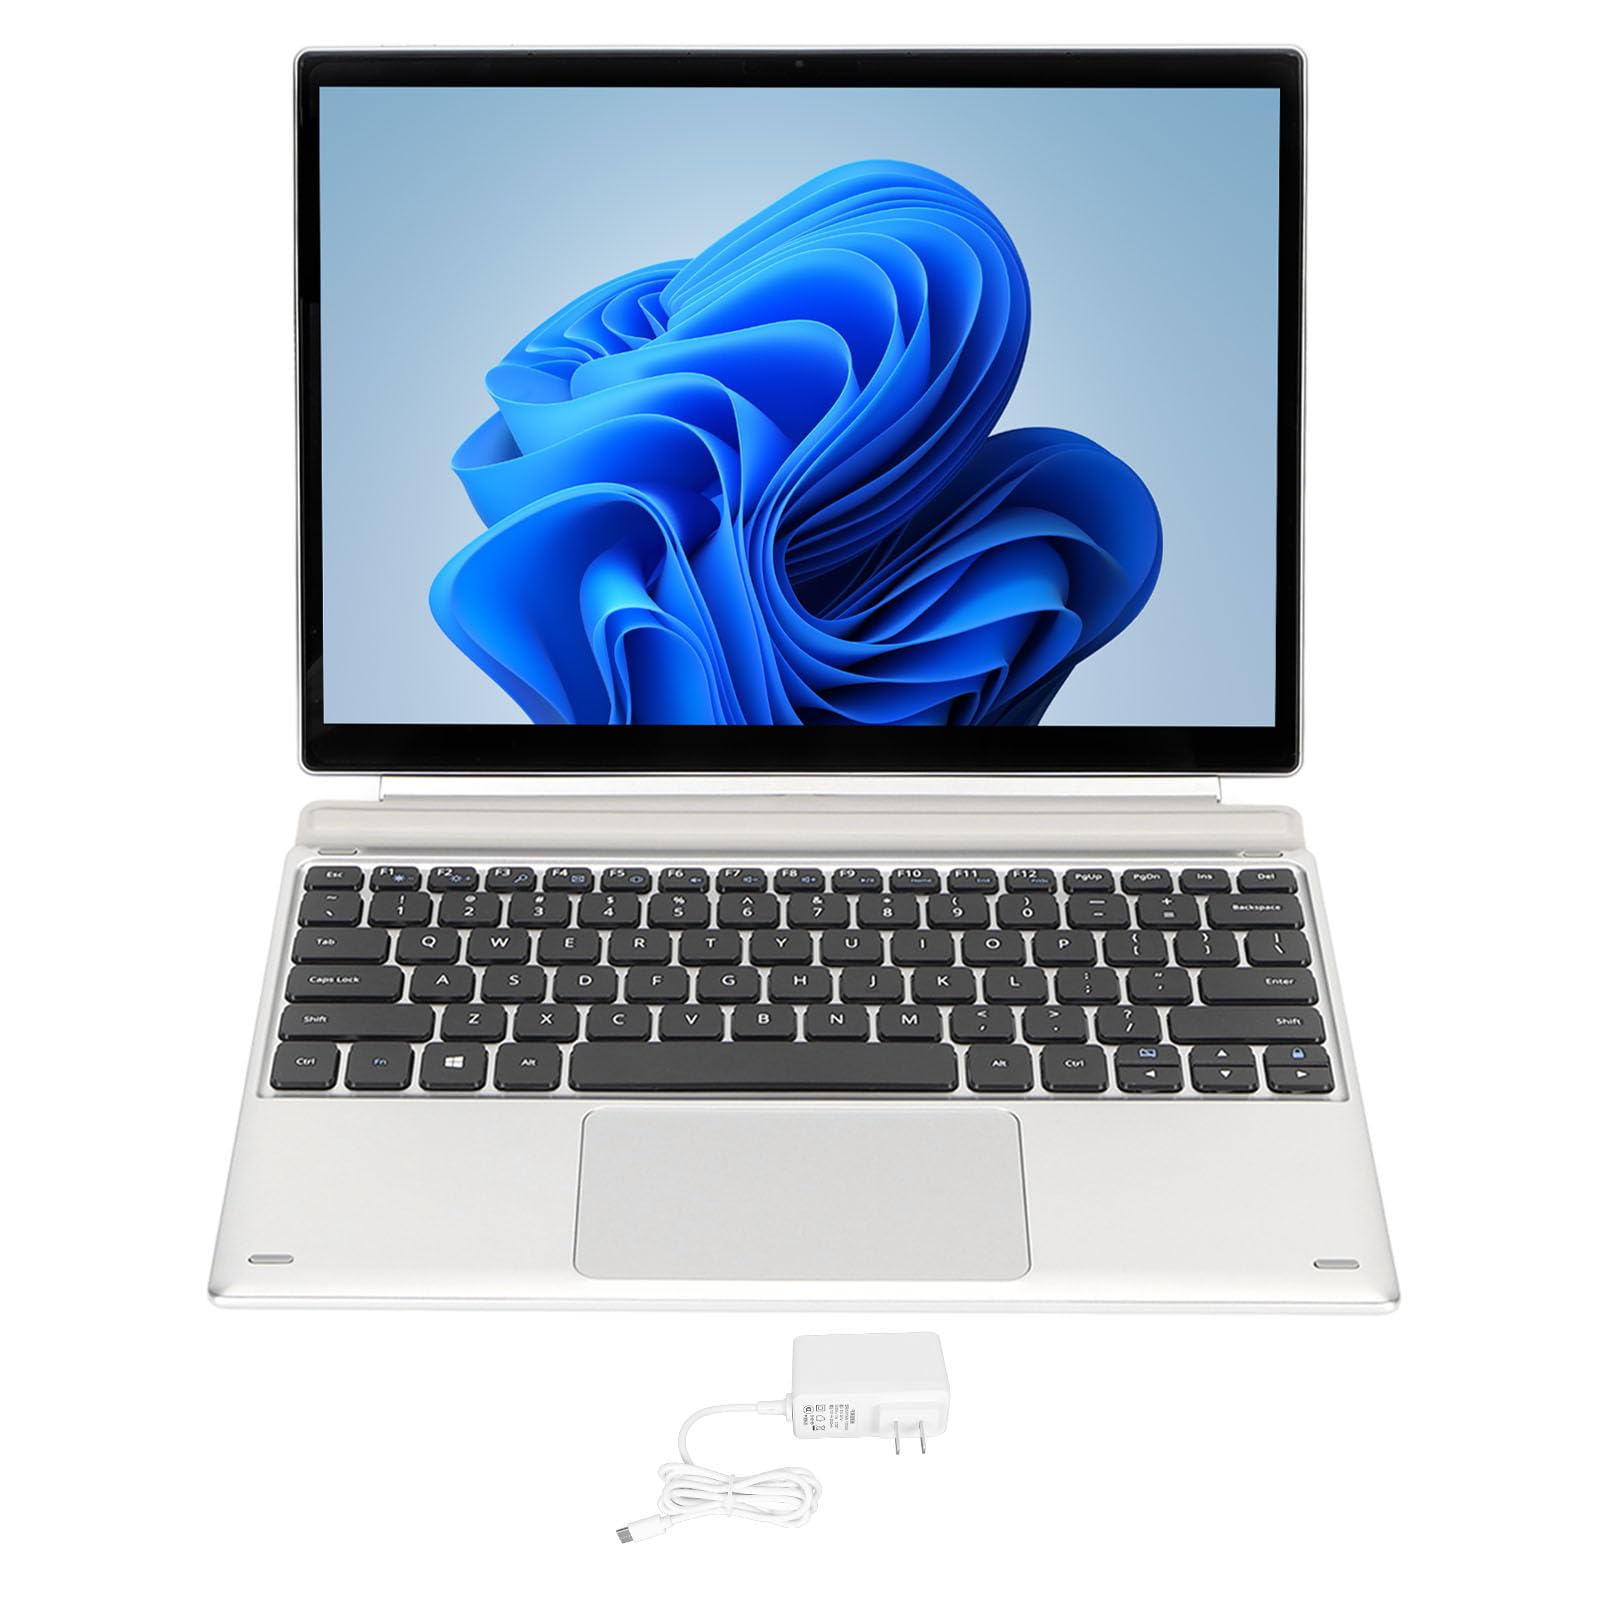 2 in 1 Laptop, 12.3 IPS Display, 2880X1920 Resolution, Laptop for 11, Touch Screen Notebook with Magnetic Keyboard, 2.4GHz, 5GHz WiFi (16+1TB US Plug)